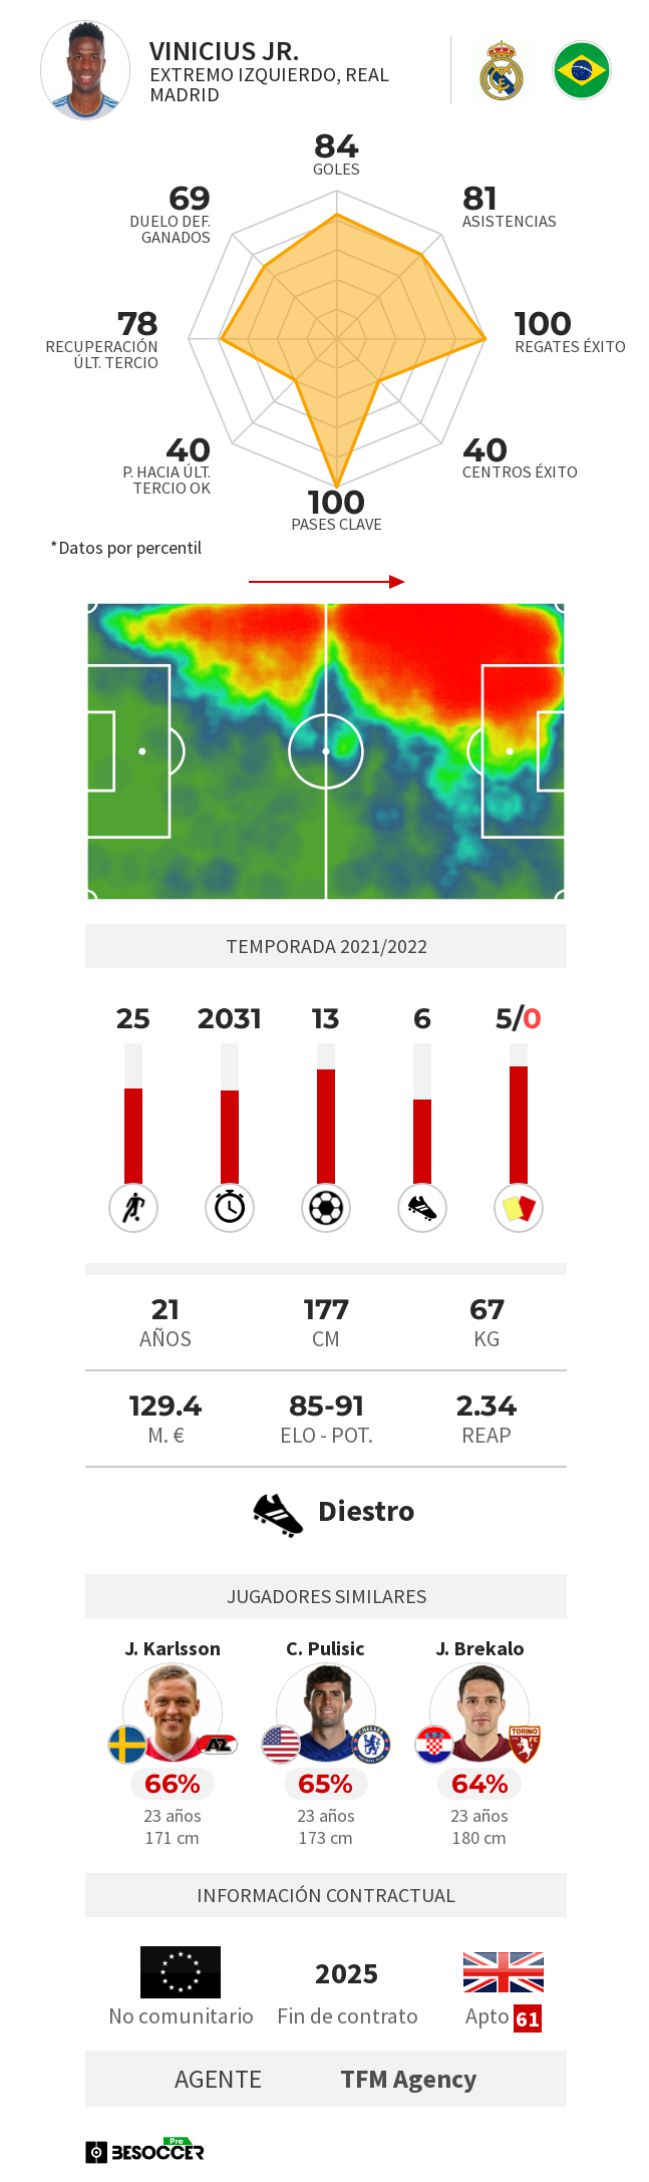 His numbers in LaLiga this course.